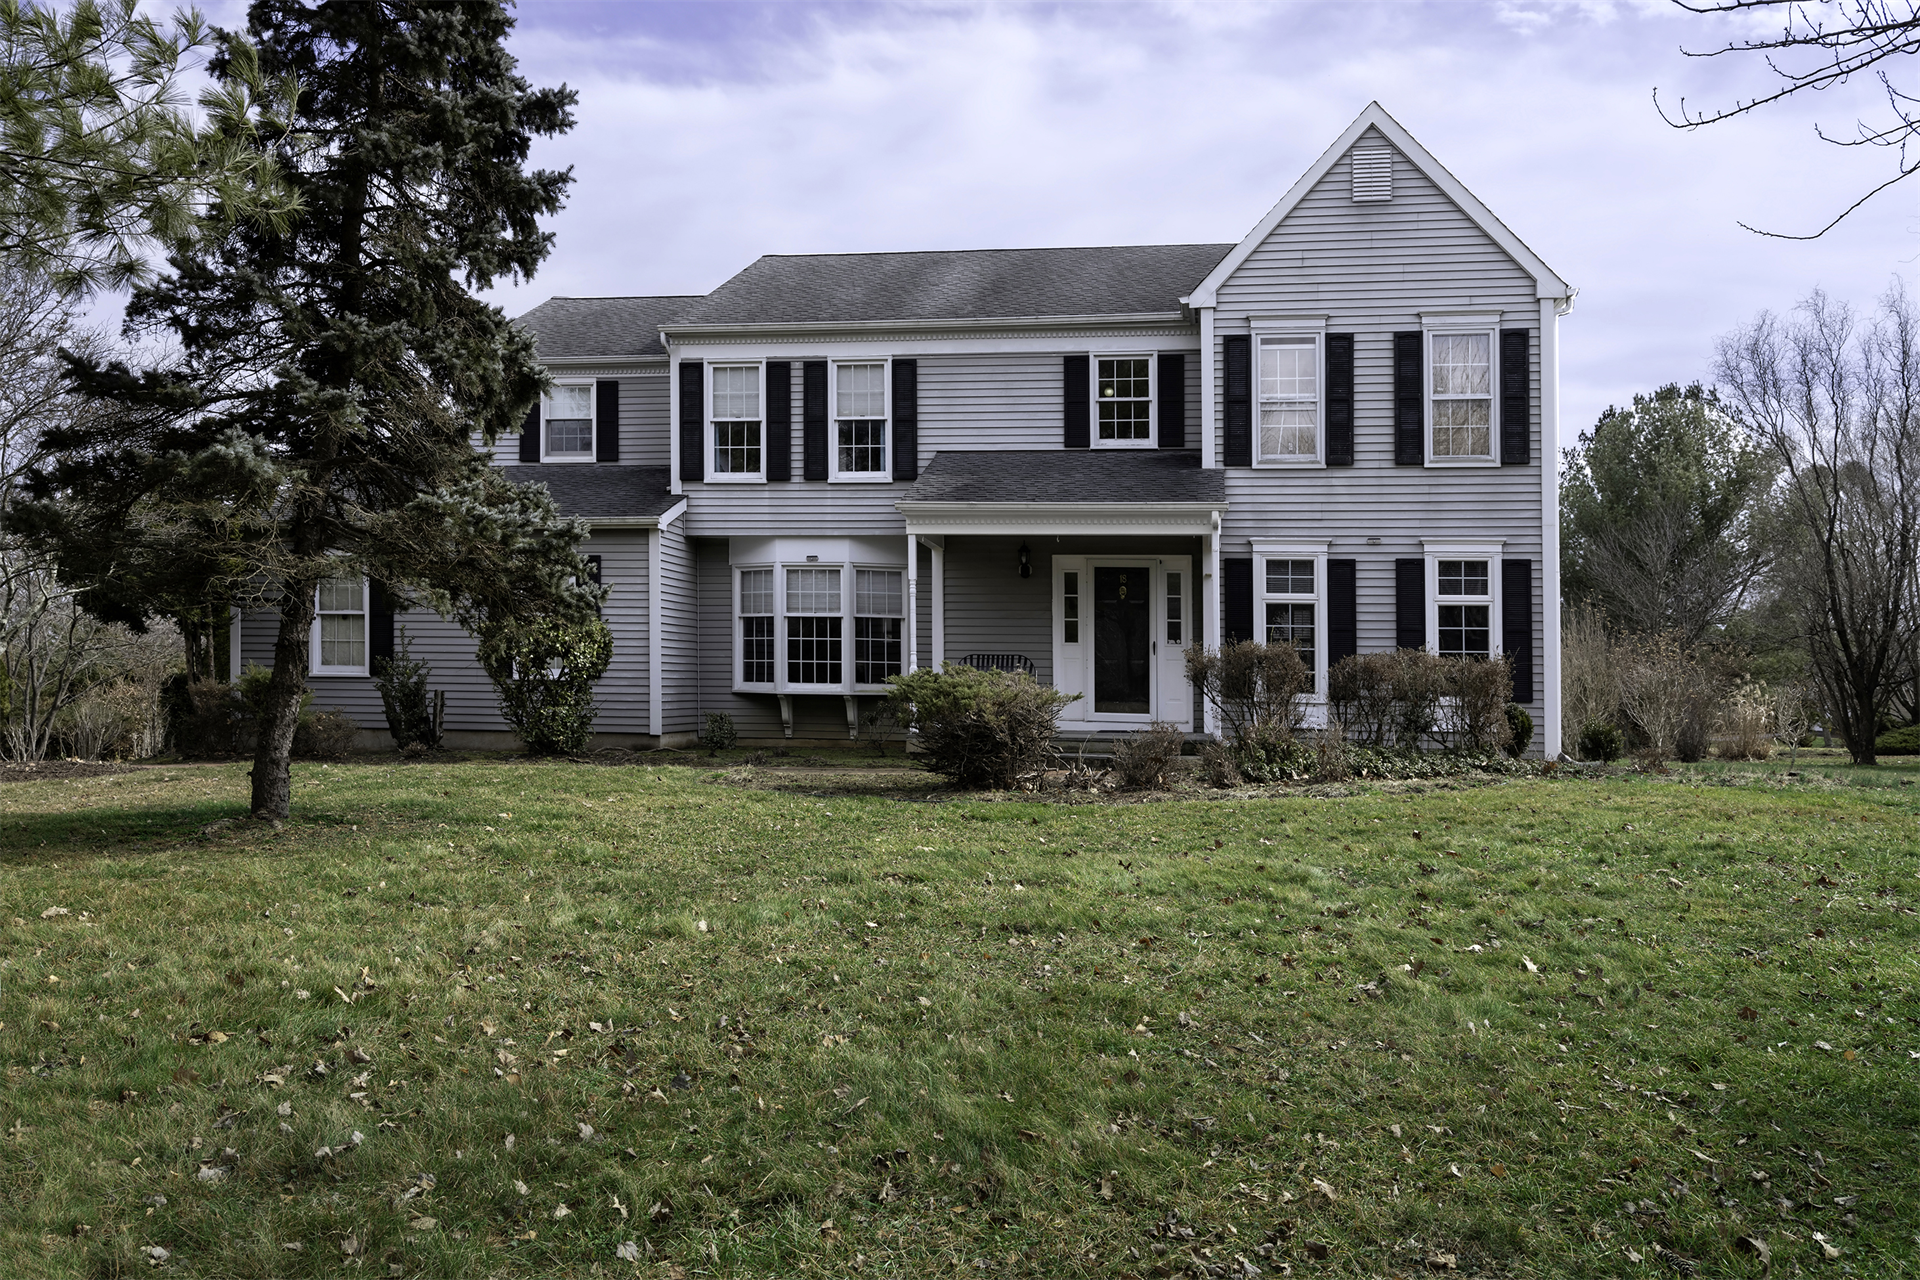 Single Family at West Windsor, New Jersey United States